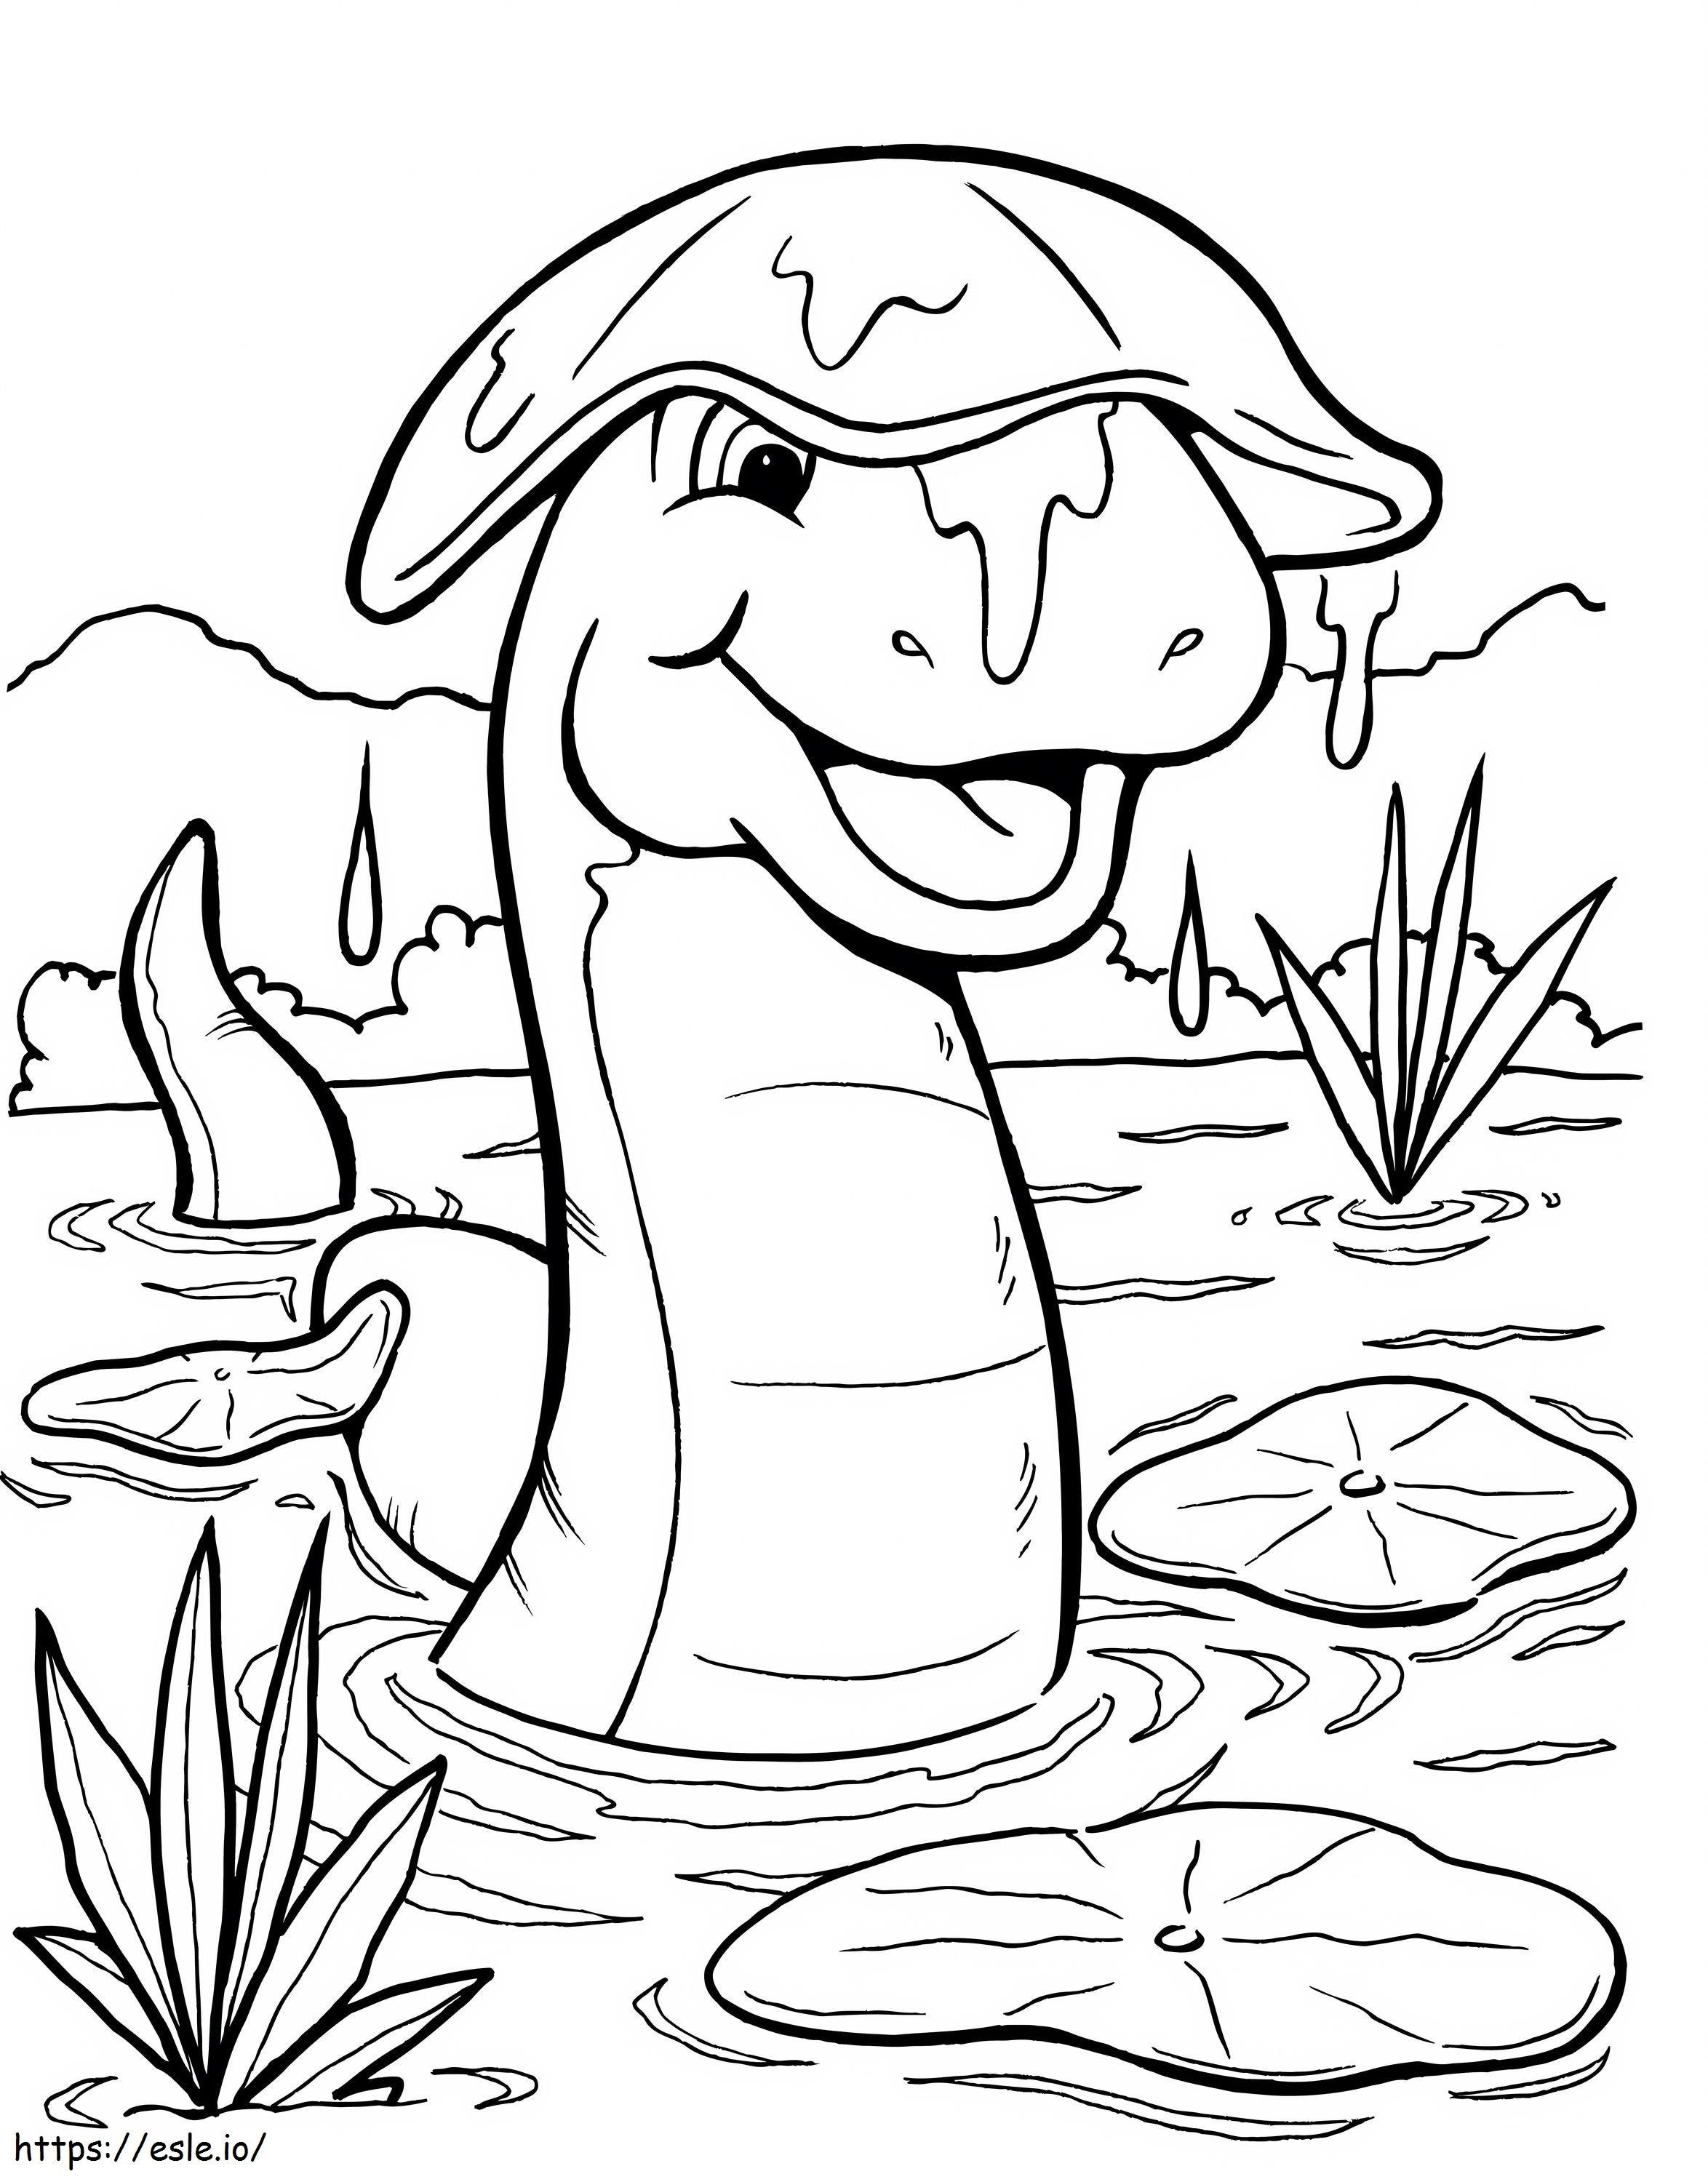 Lily Pad And Snake Scaled coloring page